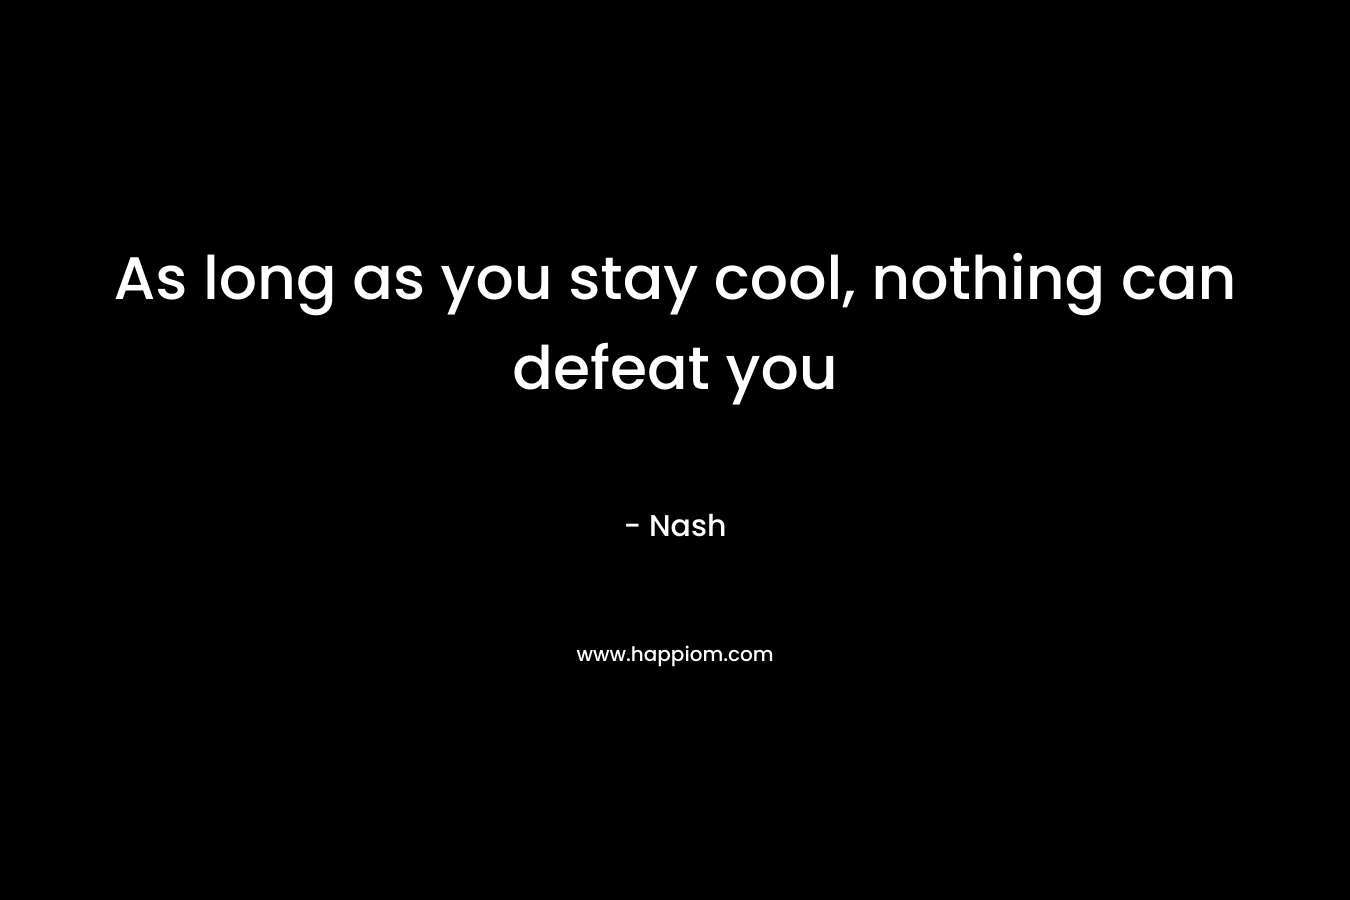 As long as you stay cool, nothing can defeat you